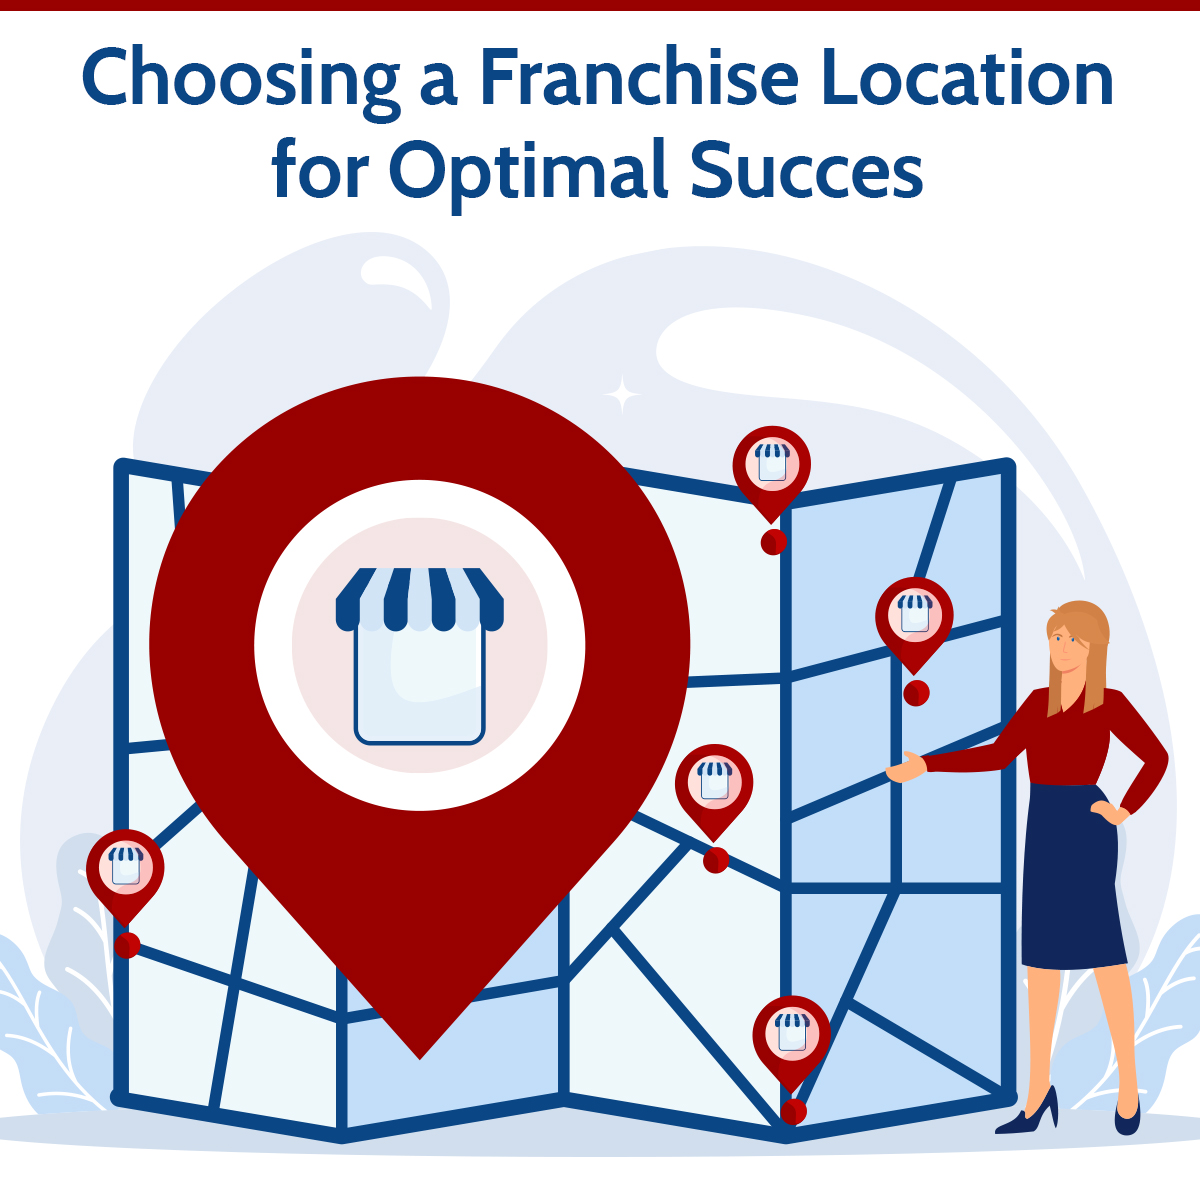 Choosing a Franchise Location for Optimal Succes